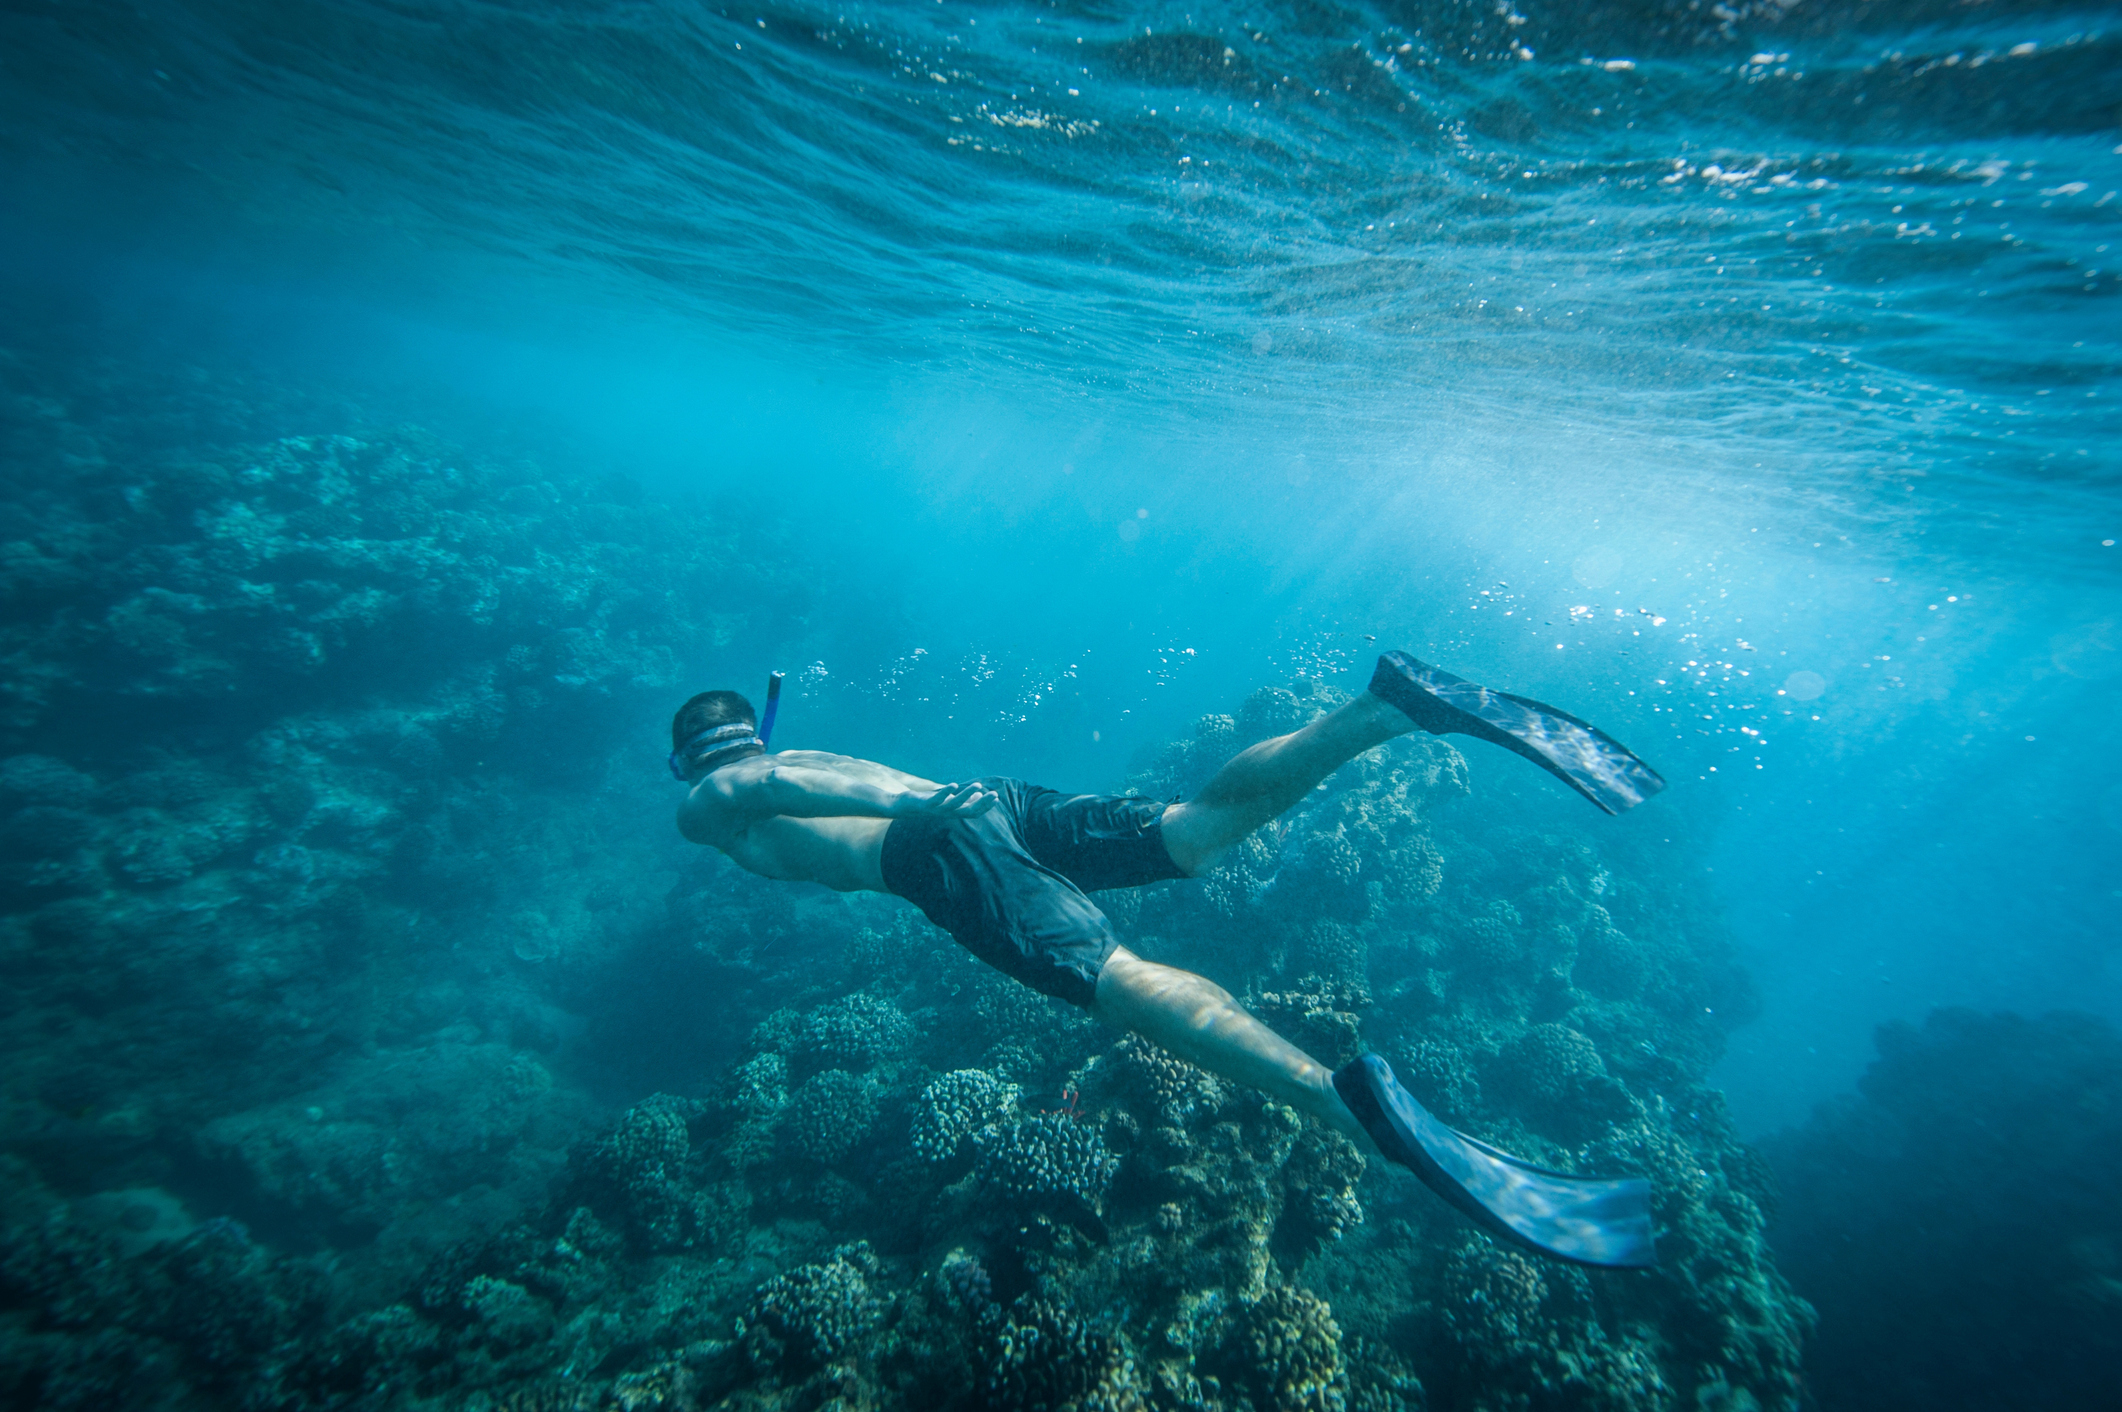 A person snorkeling underwater among coral reefs, showcasing marine life exploration